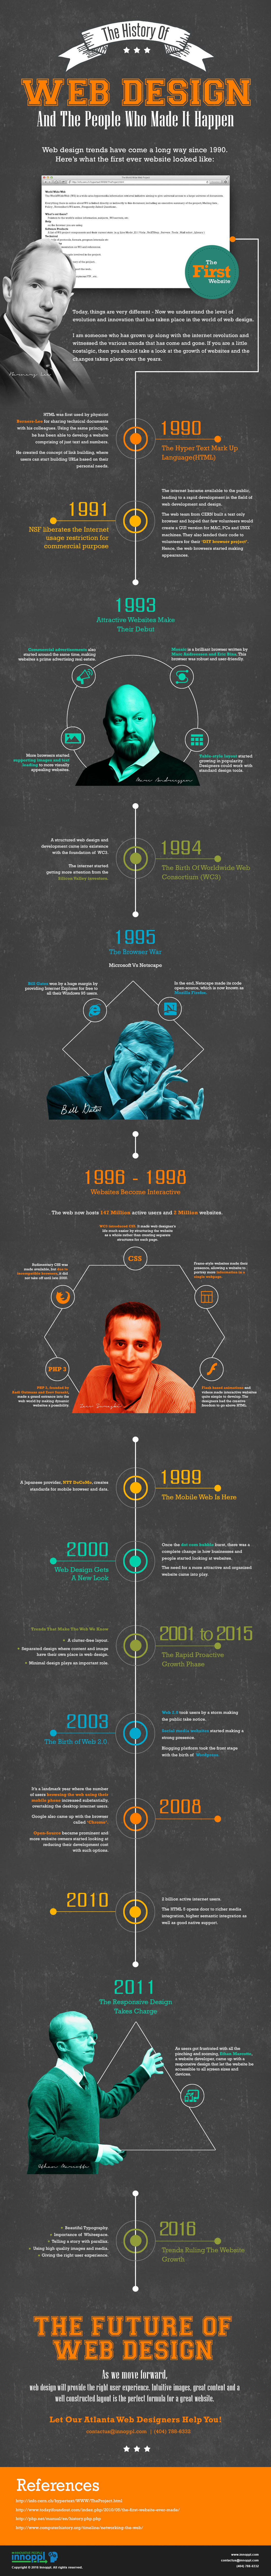 History Of Web Design & People Who Made It Happen